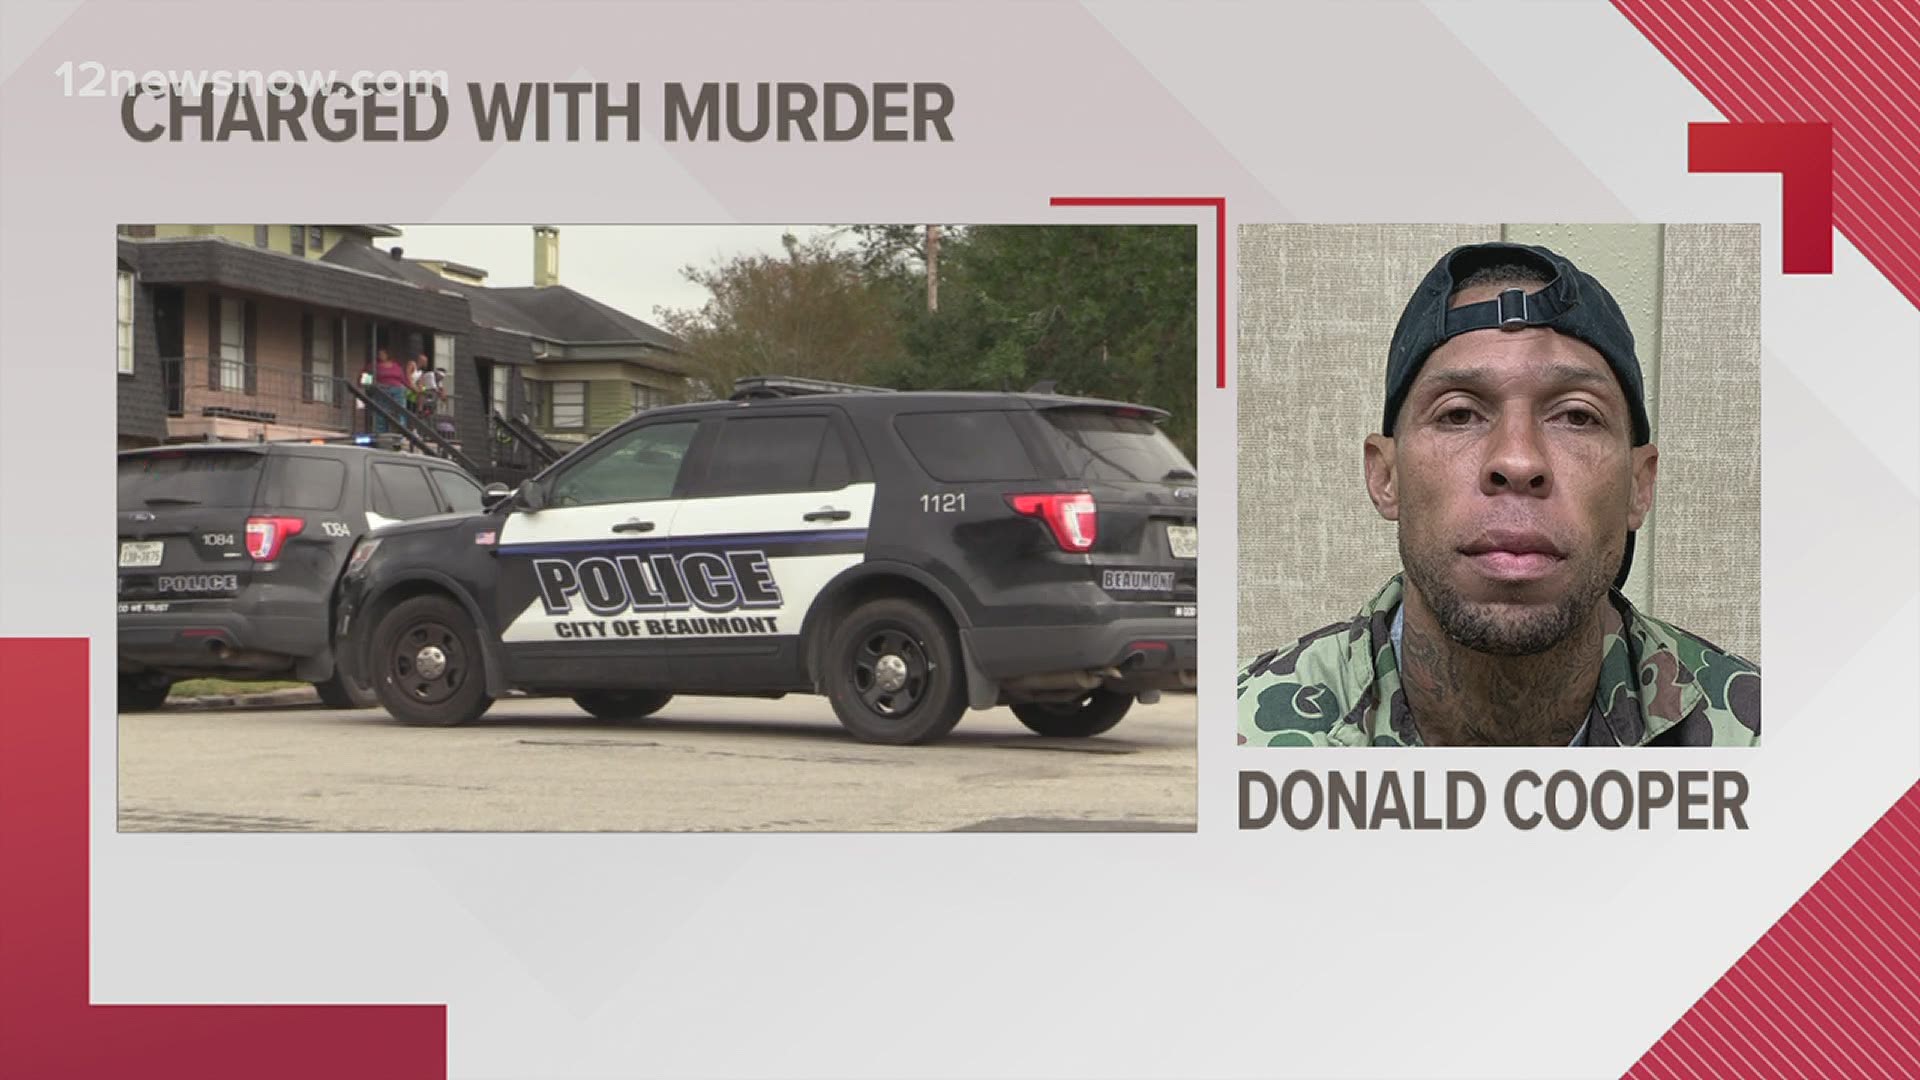 Donald Cooper is facing a murder charge in connection with the fatal stabbing on Mcfaddin Tuesday in Beaumont